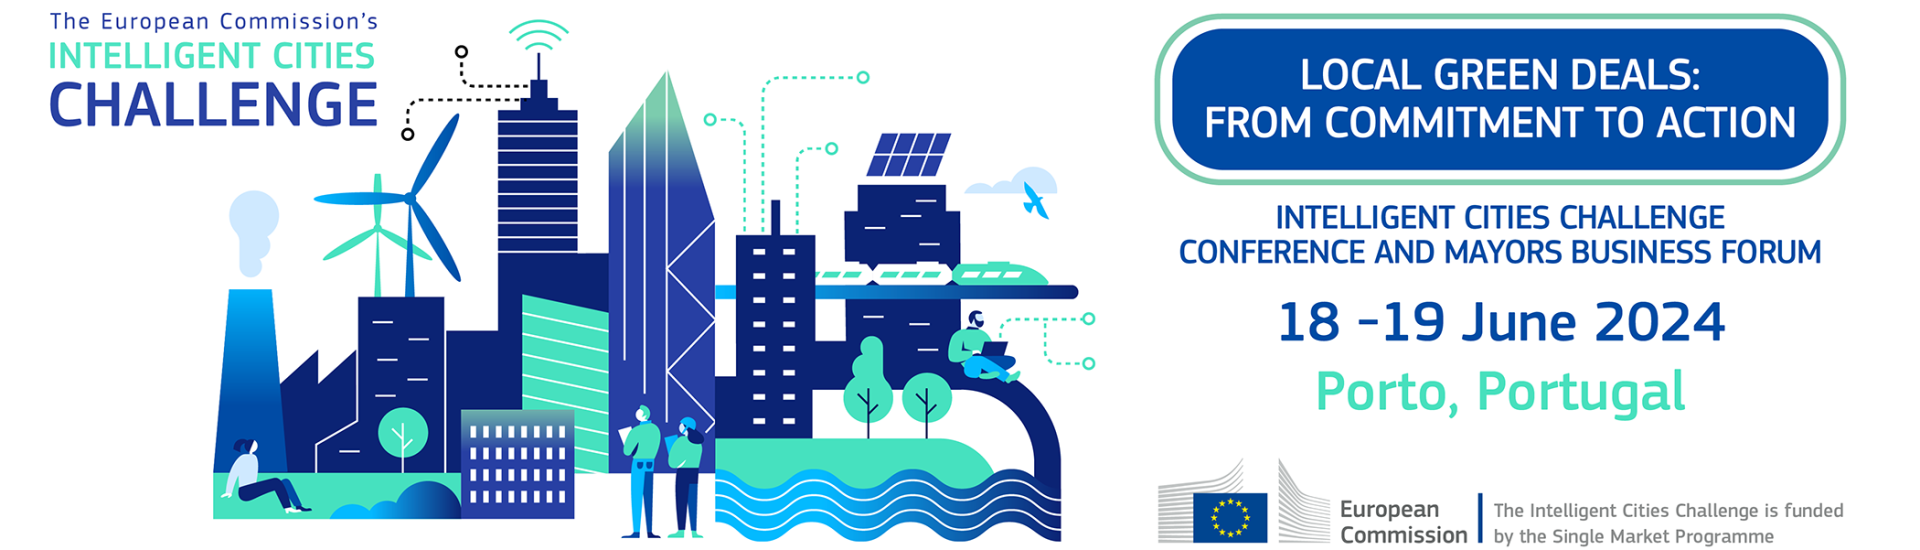 Local Green Deals from Commitment to Action: Intelligent Cities Challenge Conference